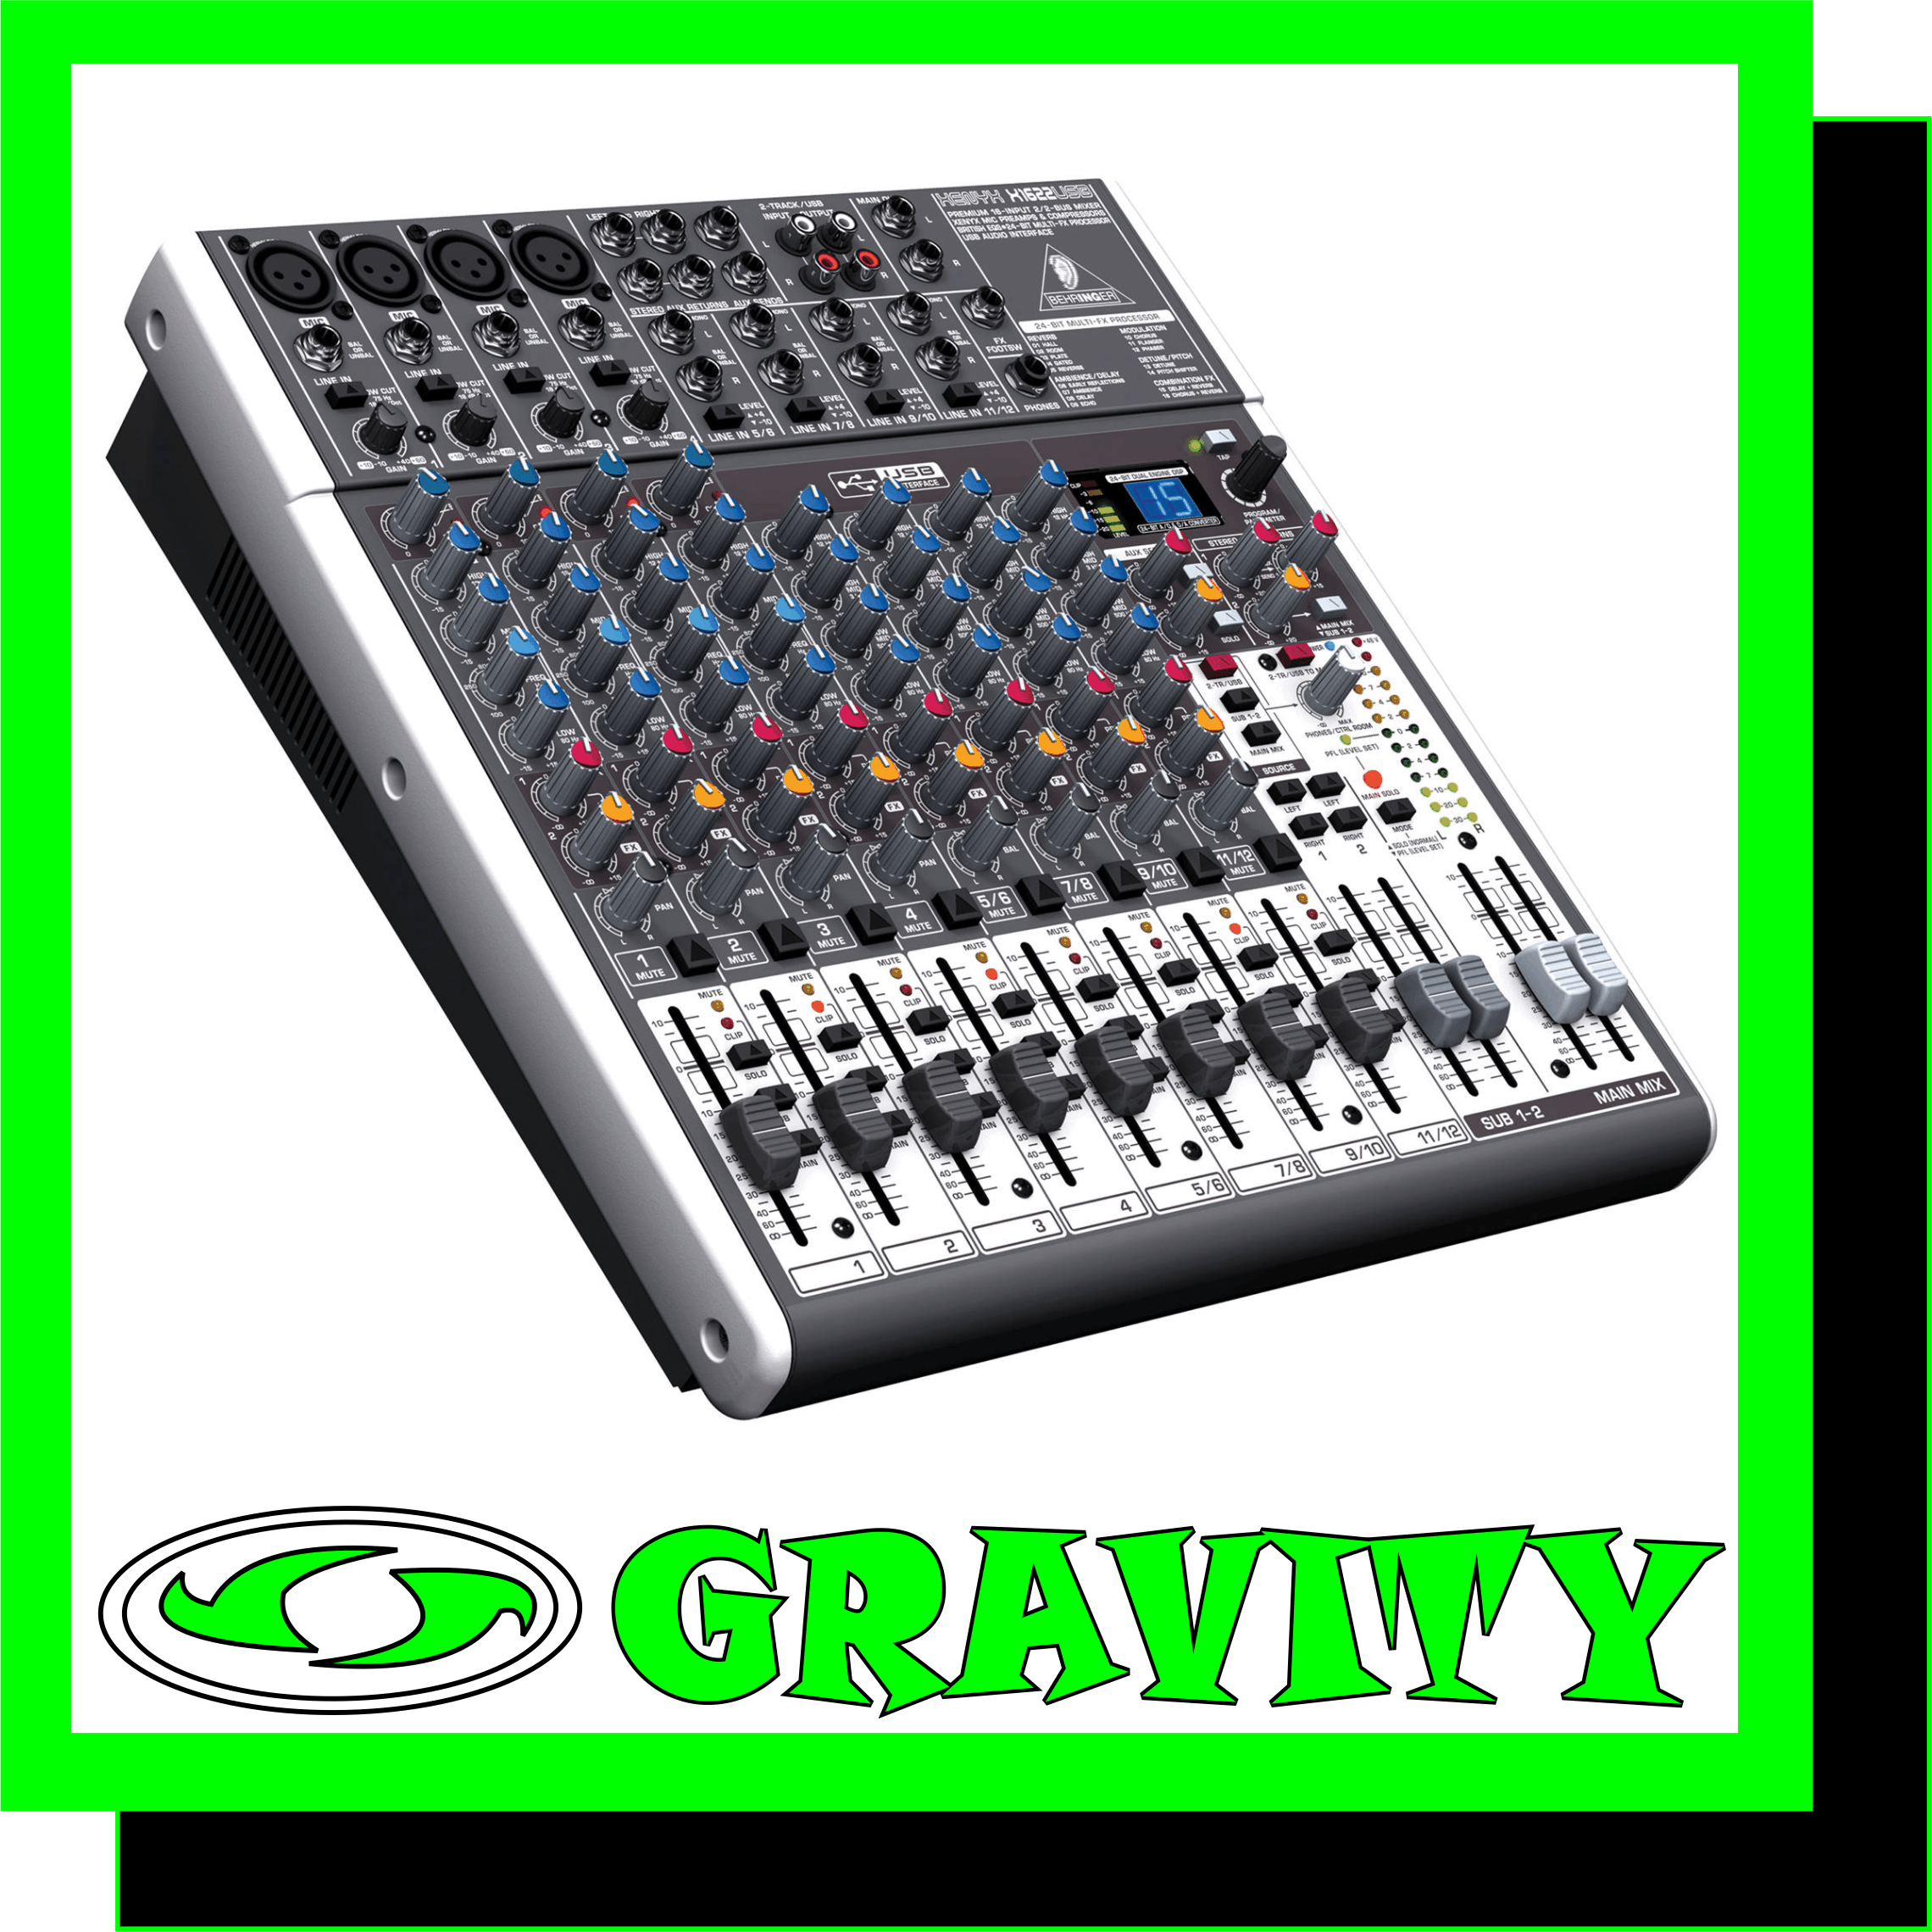 XENYX X1622USB  Product Features: -Premium ultra-low noise, high headroom analog mixer -4 state-of-the-art, phantom-powered XENYX Mic Preamps comparable to stand-alone boutique preamps -4 studio-grade compressors with super-easy “one-knob” functionality and control LED for professional vocal and instrumental sound -Neo-classic “British” 3-band EQs with semi-parametric mid band for warm and musical sound -New studio-grade FX processor with 16 editable presets including reverb, chorus, flanger, delay, pitch shifter, multi-effects, Tap function and storable user parameter  settings -Built-in stereo USB/Audio Interface to connect directly to your computer. Free audio recording, editing and podcasting software plus 150 instrument/effect plug-ins and -ultra-low latency driver downloadable at www.behringer.com -Channel inserts on each mono channel for flexible connection of outboard equipment -2 aux sends per channel: 1 pre/post fader switchable for monitoring/FX applications, 1 post fader (for internal FX or as external send) -Clip LEDs, mute, main mix and subgroup routing switches, solo and PFL functions on all channels -2 subgroups with separate outputs for added routing flexibility; 2 multi-functional stereo aux returns with flexible routing -Main mix outputs with ¼” jack and gold-plated XLR connectors, separate control room, headphones and stereo rec outputs -Control room/phones outputs with multi-input source matrix; rec inputs assignable to main mix or control room/phones outputs -Long-wearing 60-mm logarithmic-taper faders and sealed rotary controls -“Planet Earth” switching power supply for maximum flexibility (100 – 240 V~), noise-free audio, superior transient response plus low power consumption for energy saving -Rack mount brackets included for ultimate flexibility- -High-quality components and exceptionally rugged construction ensure long life -Conceived and designed by BEHRINGER Germany